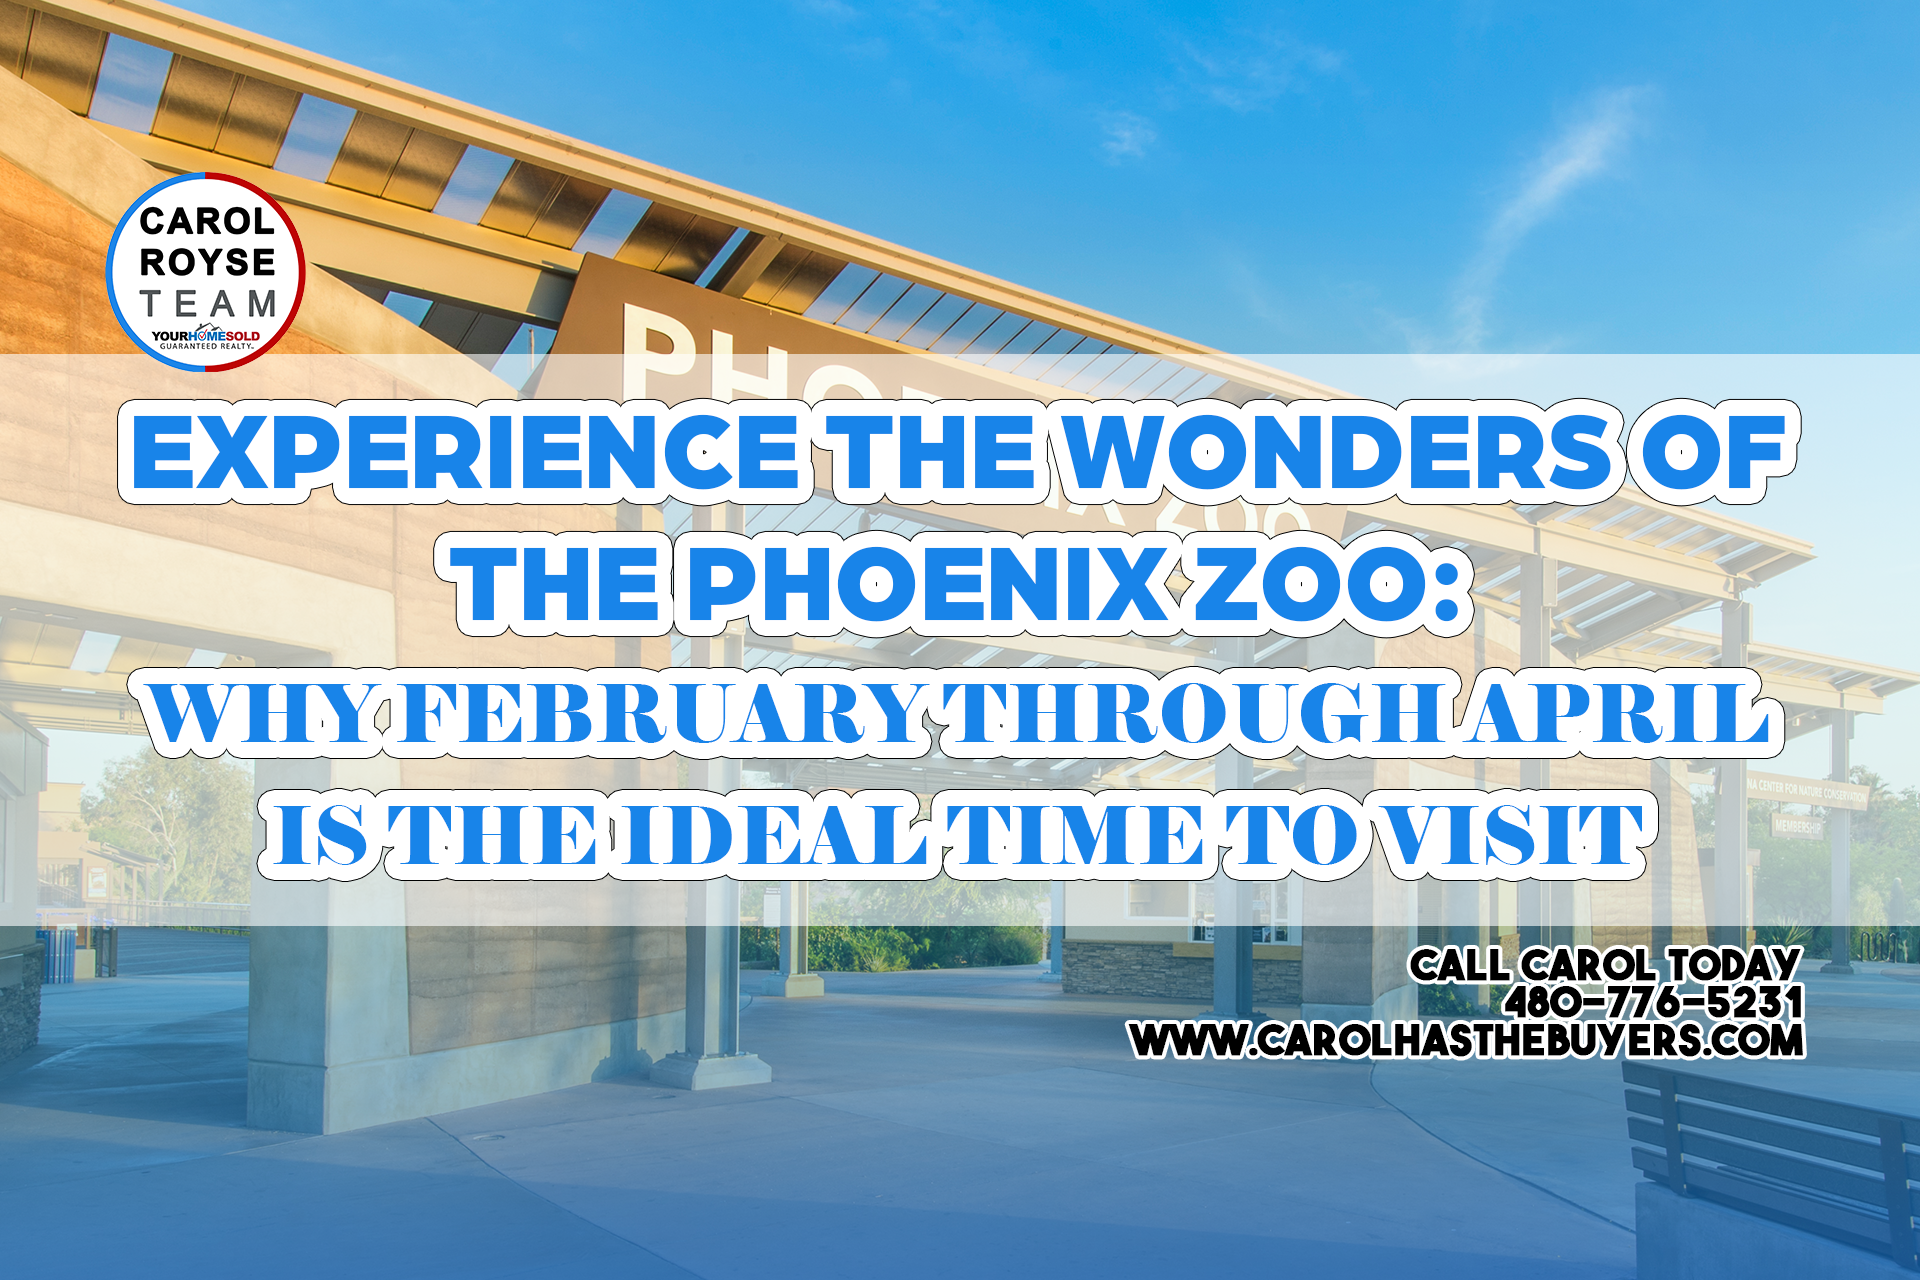 Experience the Wonders of the Phoenix Zoo: Why February through April is the Ideal Time to Visit